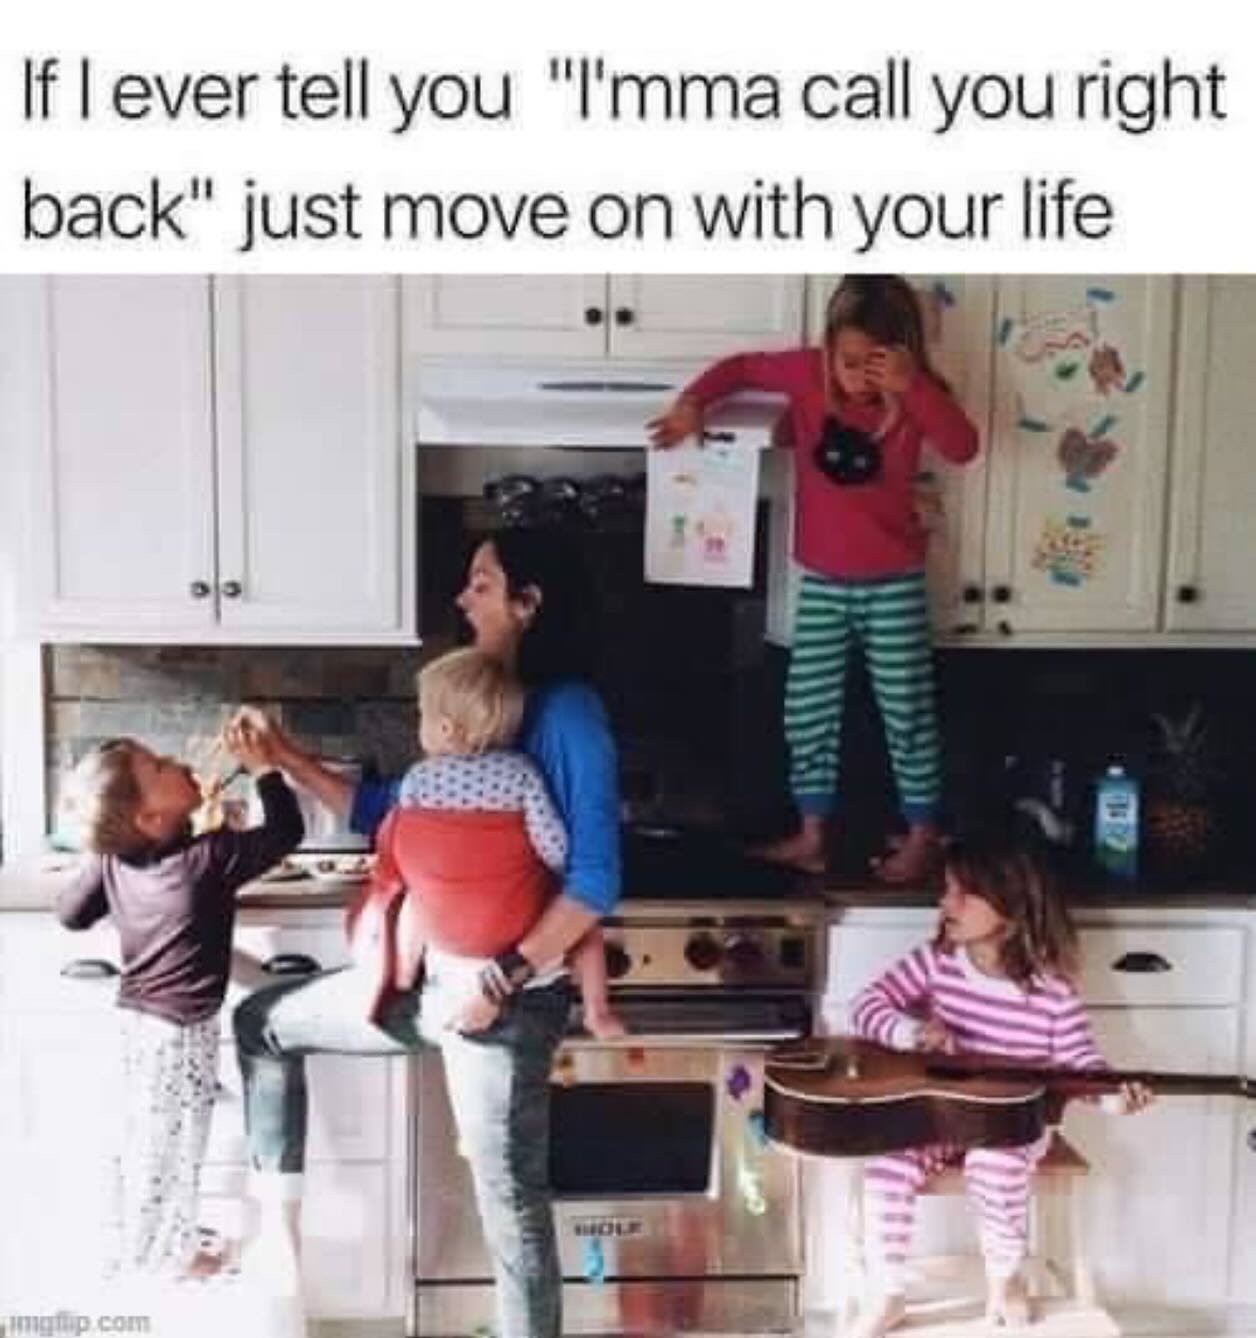 This one is fun and so true! &ldquo;I&rsquo;mma call you right back&rdquo; can mean anything from &ldquo;soon&rdquo; to never. Some things just vanish from our radar when we are busy with children all around. Can you relate to this? You are not alone